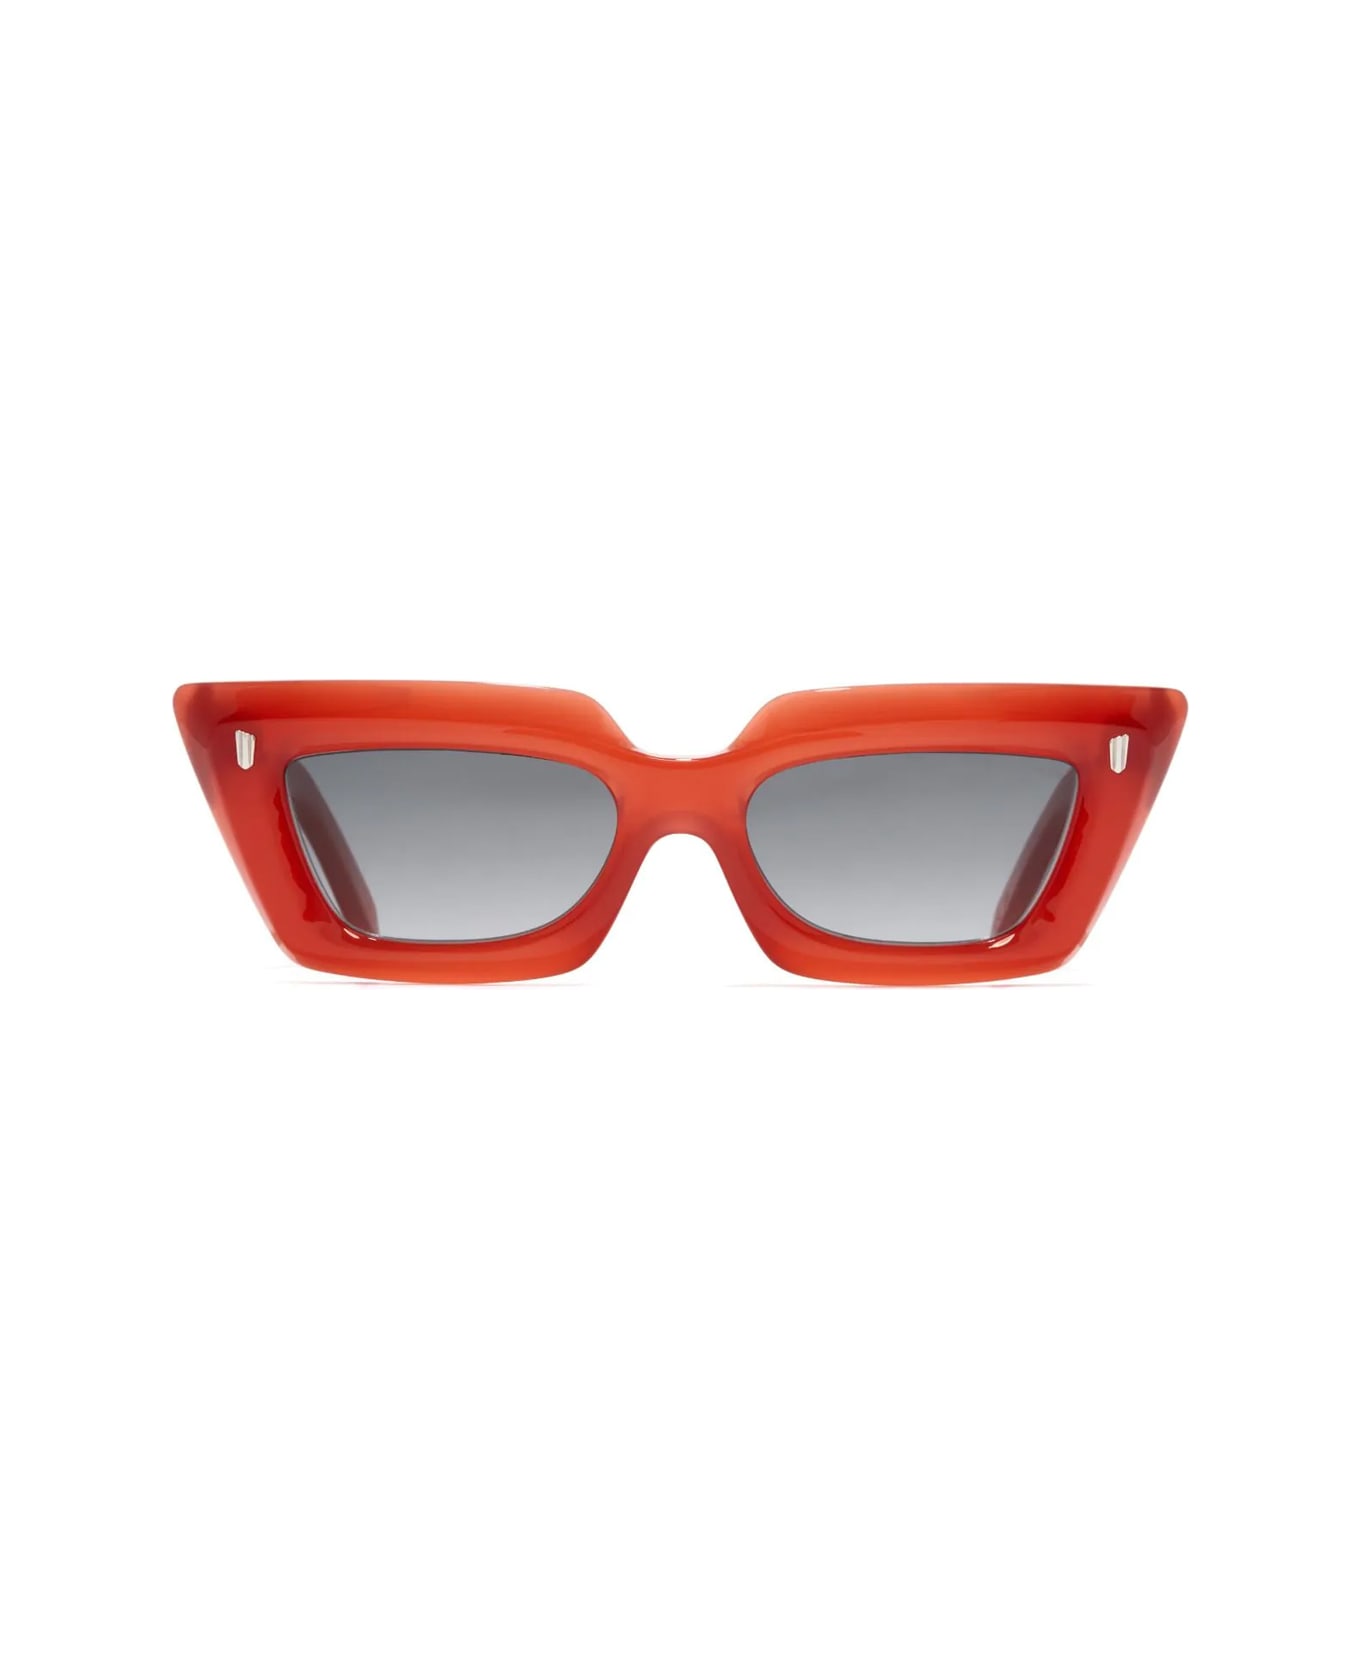 Cutler and Gross 1408 B1 Tomato Sunglasses - Rosso